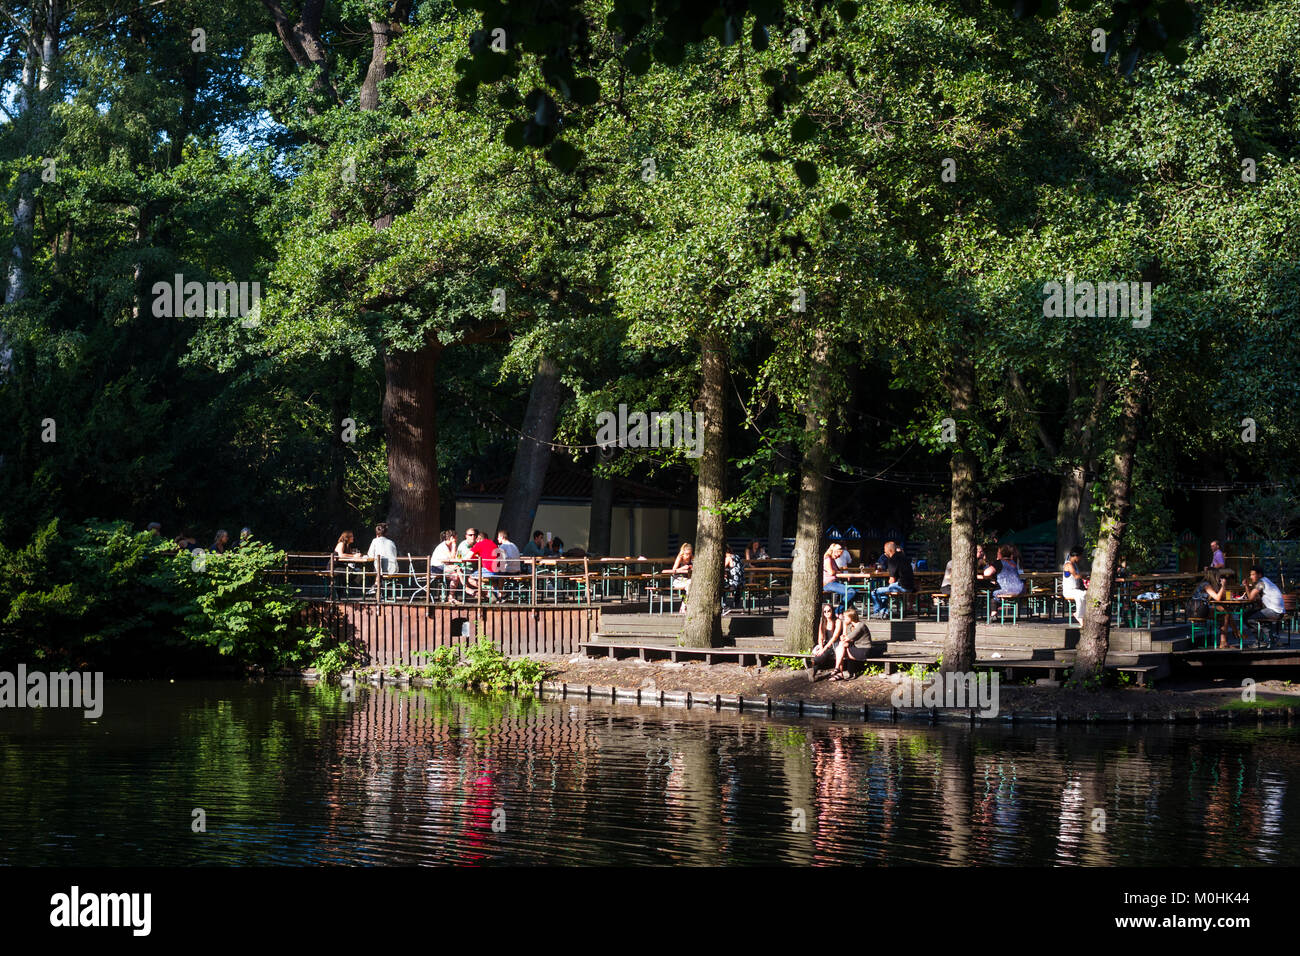 People relaxing at the Cafe Am Neuen See in the Tiergarten, Berlin, Germany. Stock Photo